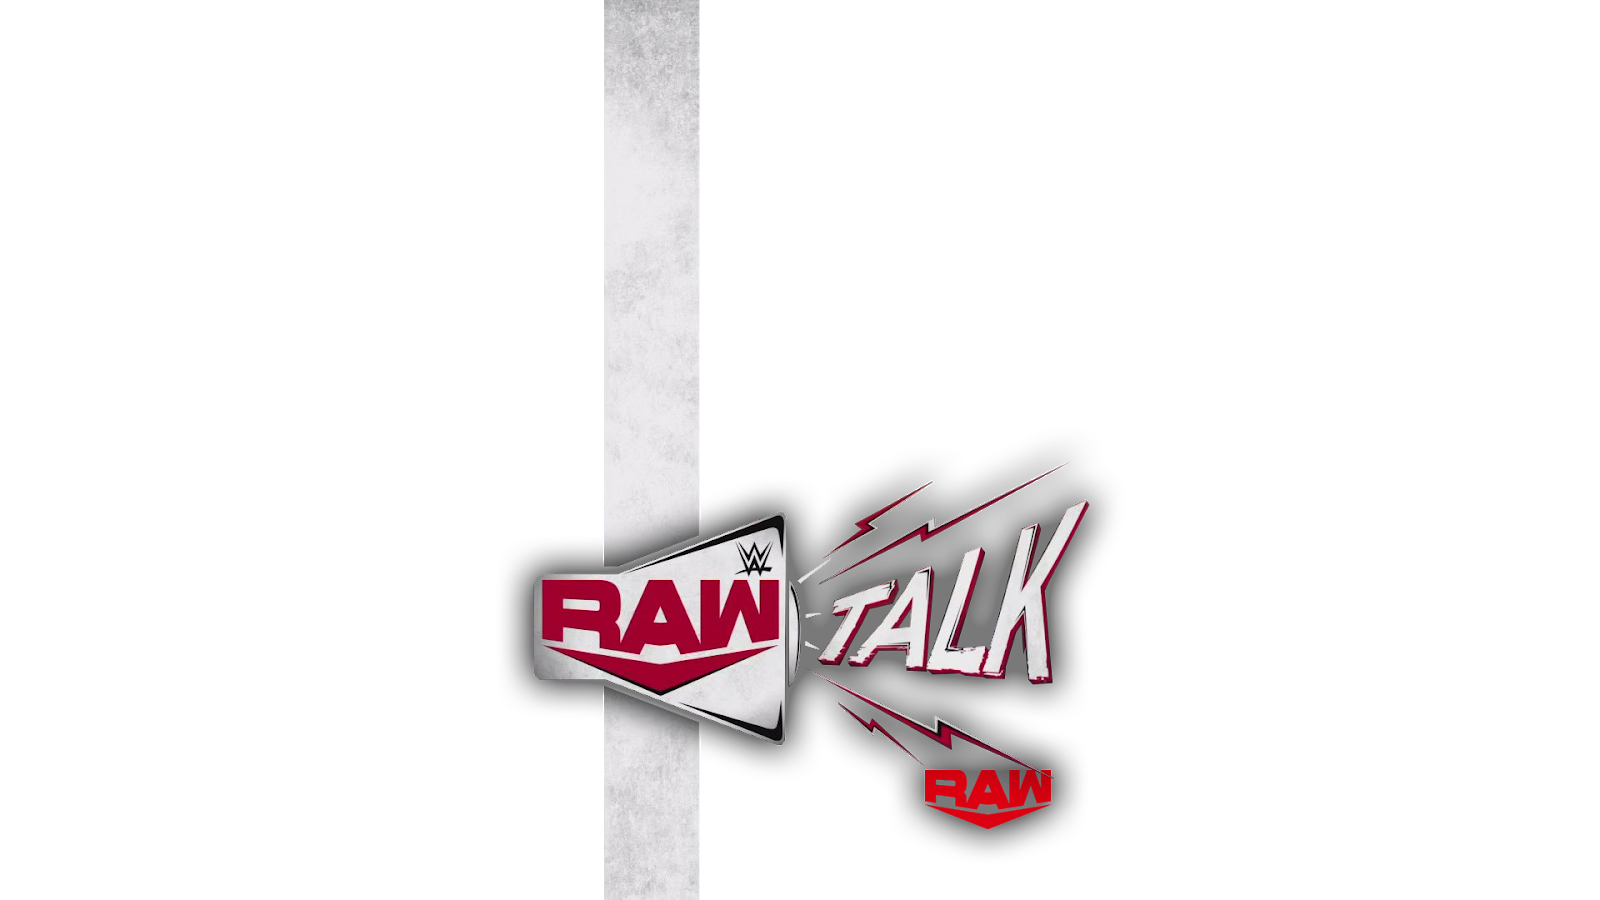 Renders Backgrounds Logos Wwe Raw Talk Show V2 Psd Template